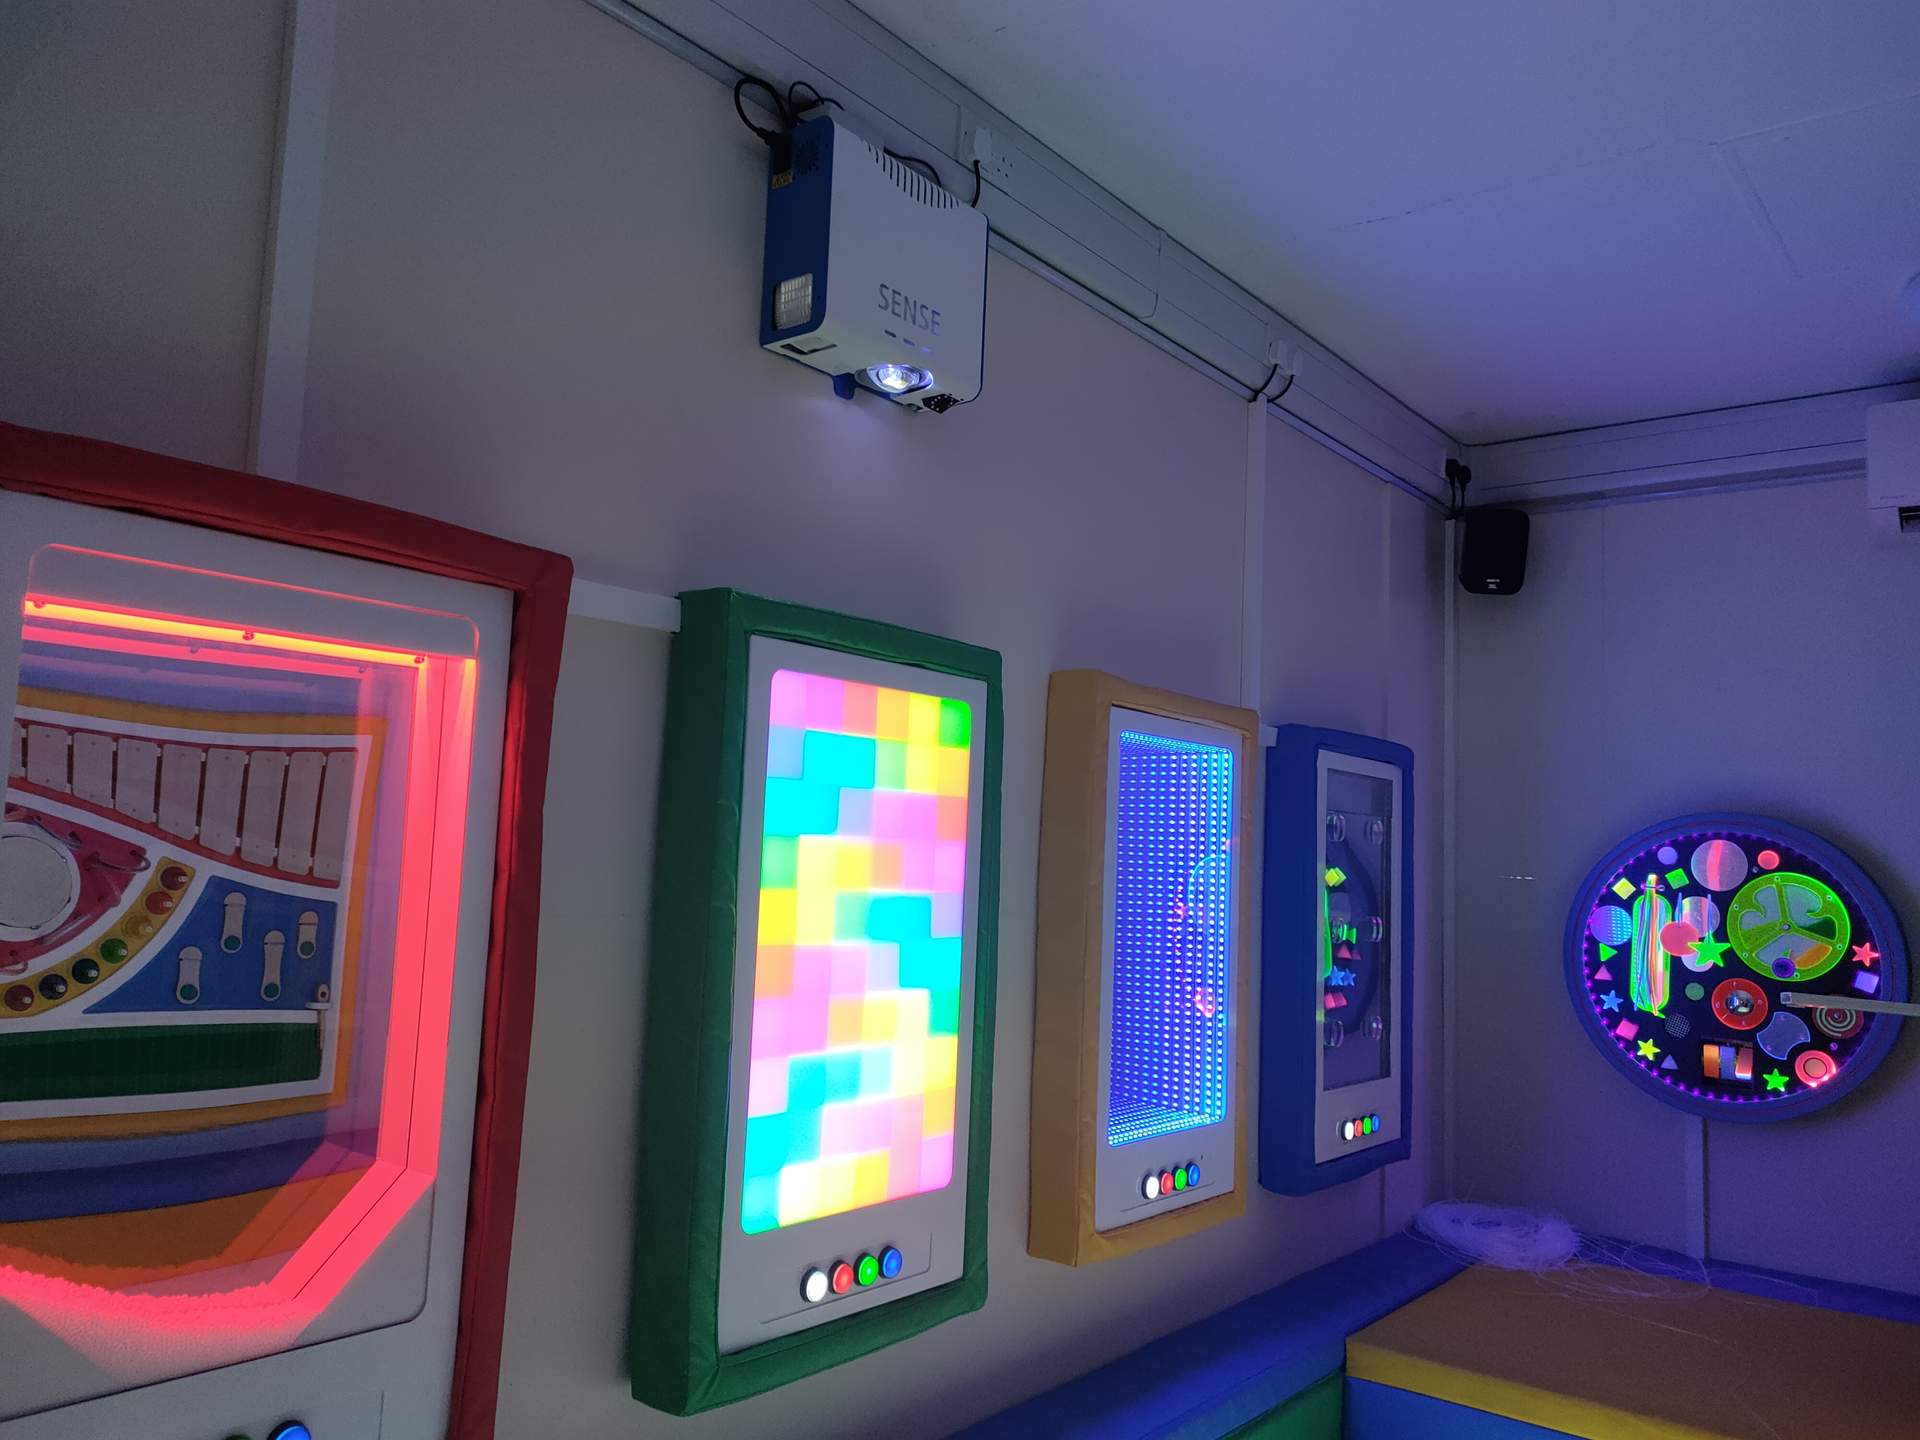 SENse Air Wall mounted Interactive Projection installed into a sensory room